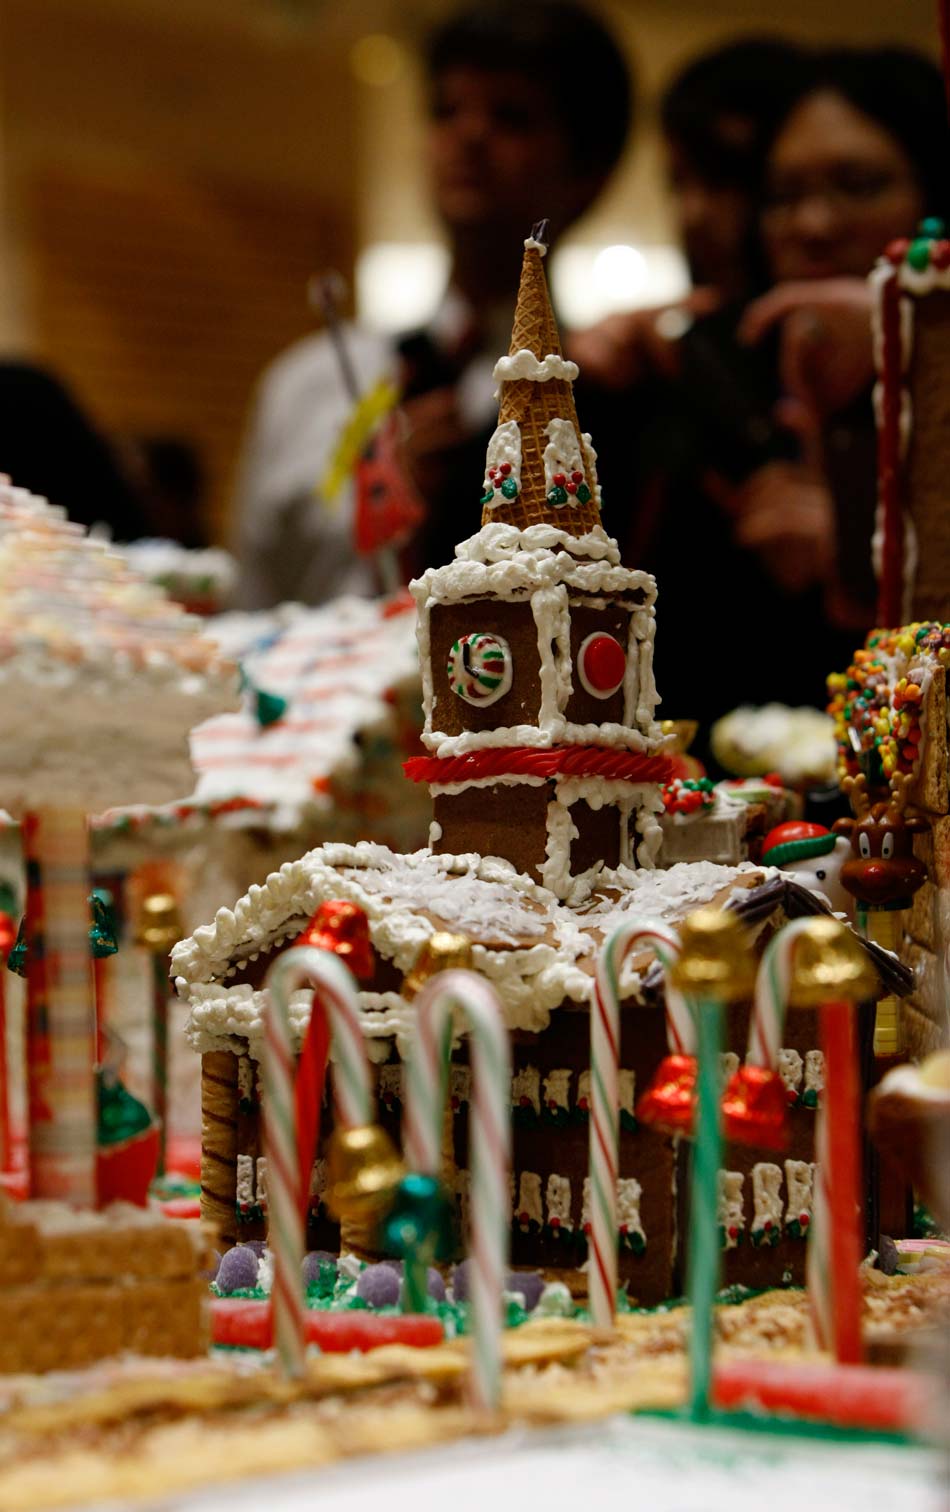 A “bell tower” is placed in “gingerbread village” in Washington D. C., capital of the United States, on Nov. 26, 2012. The “gingerbread village” was proposed to build by an architect in 2006.  Since then, architects and designers in the capital gather annually to build a village composed of gingerbread to celebrate the Christmas. (Xinhua/Fang Zhe)